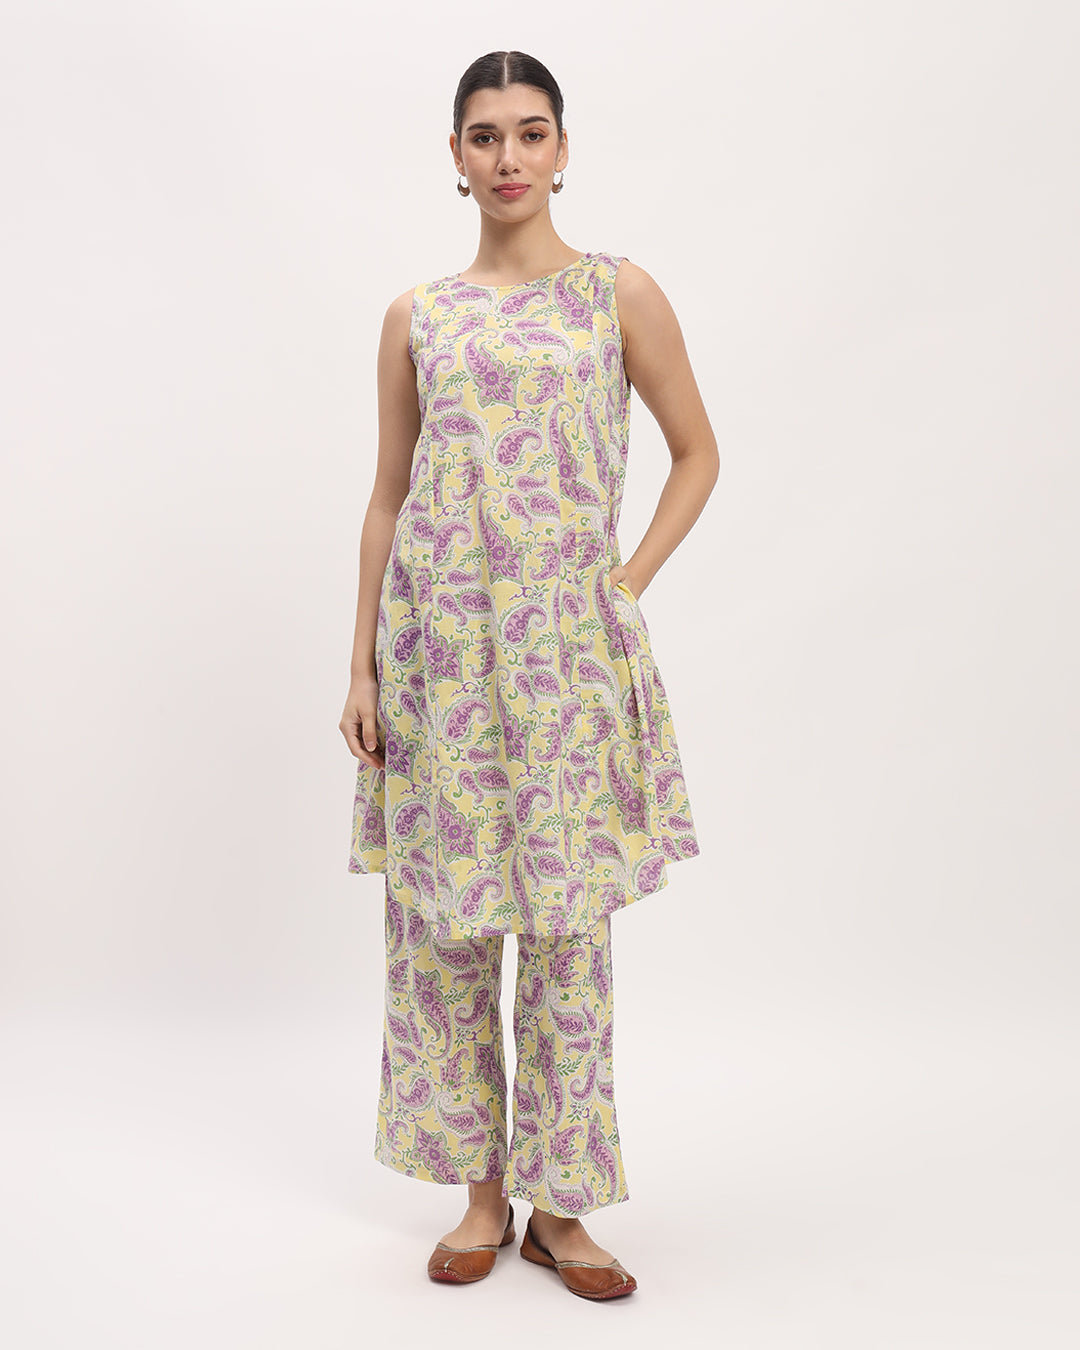 Combo: Rosewood Paisley & Lavender Paisley Sleeveless A-Line Printed Kurta (Without Bottoms)